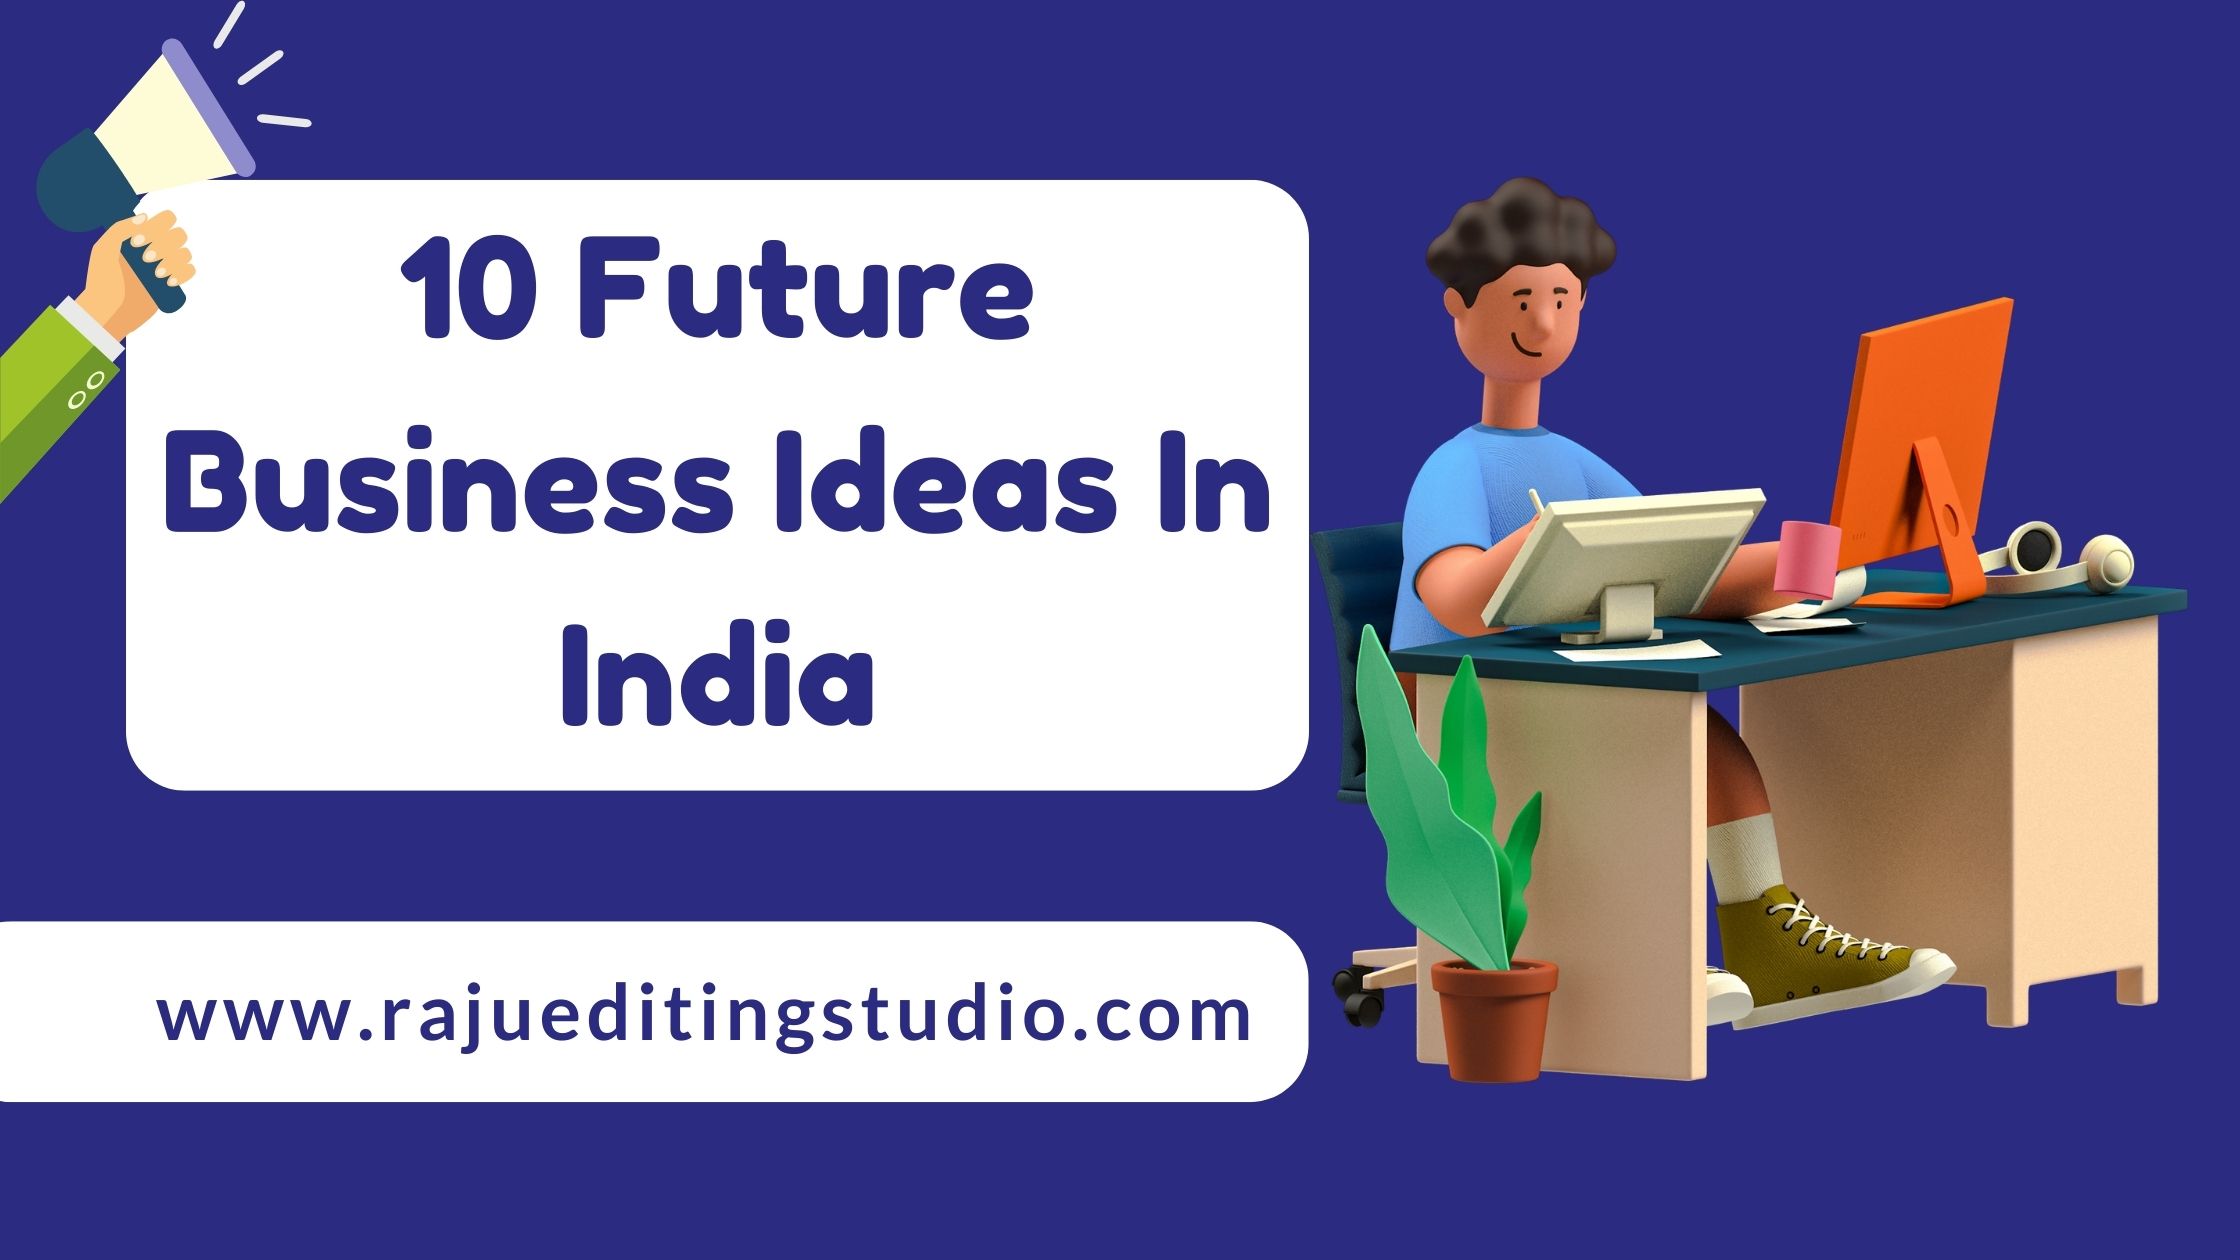 business ideas in india for future